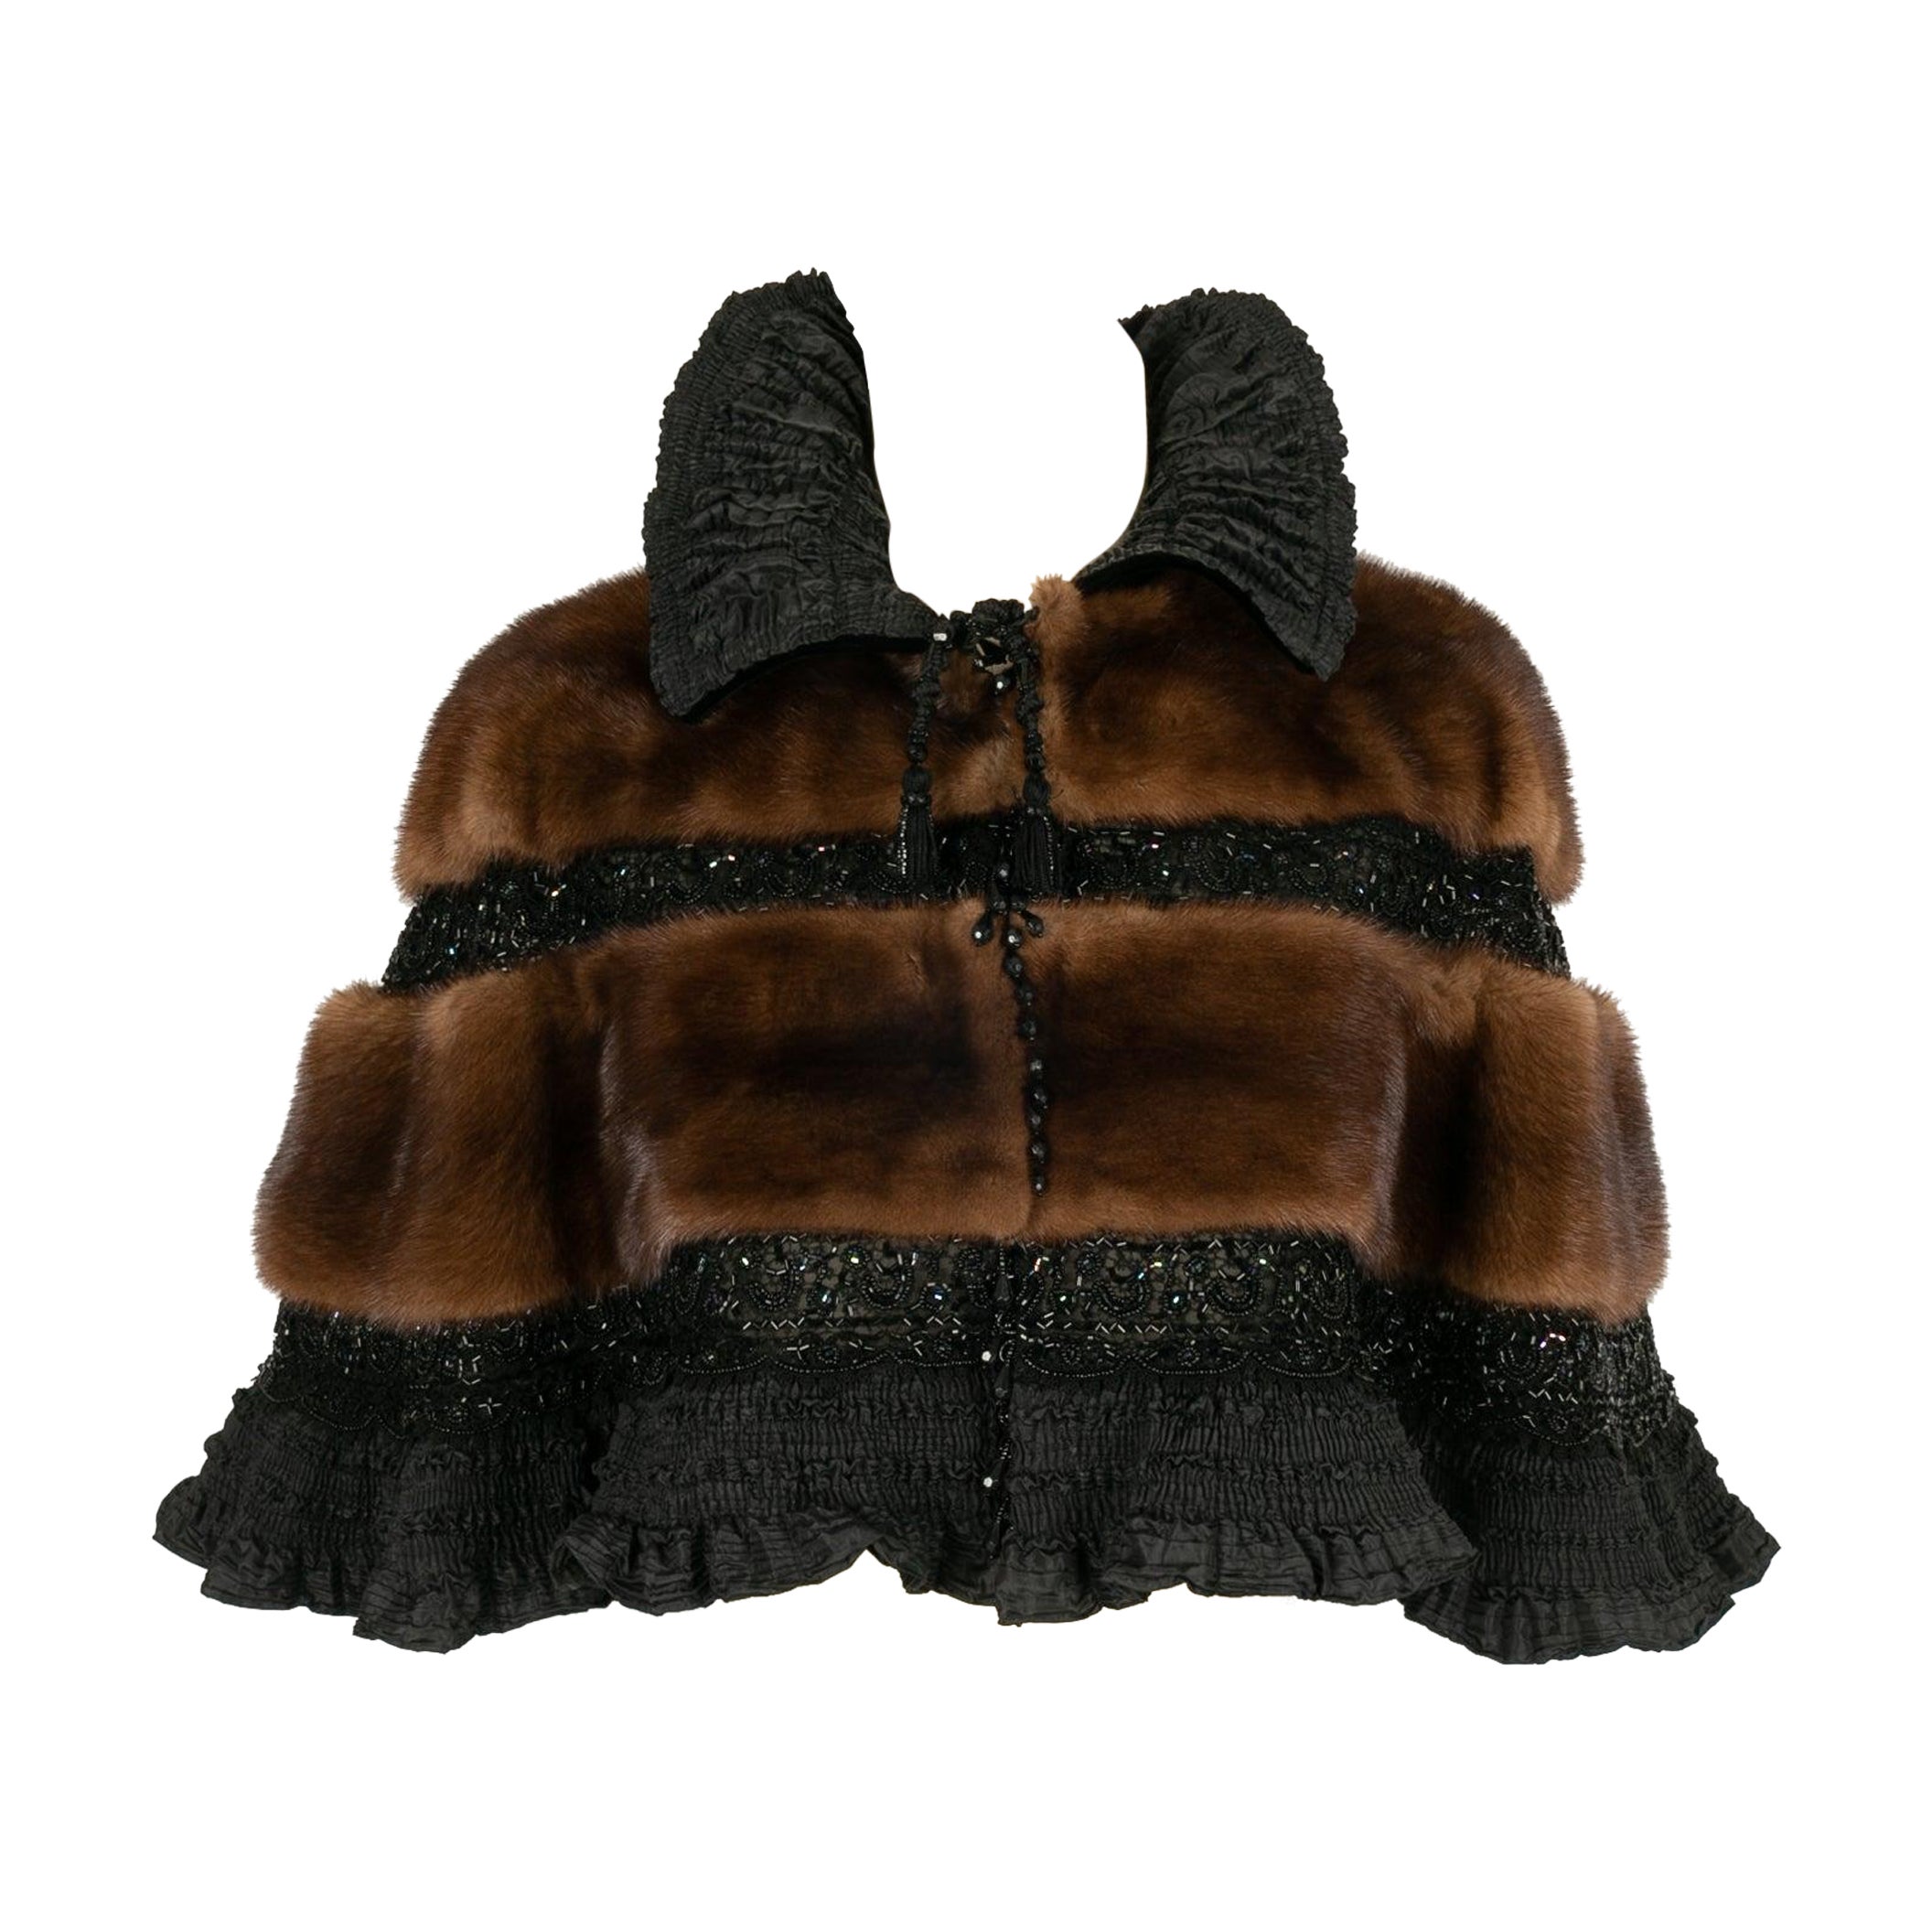 Christian Lacroix Cape in Taffeta, Lace, Beads and Mink Fur, 1998/99 For Sale